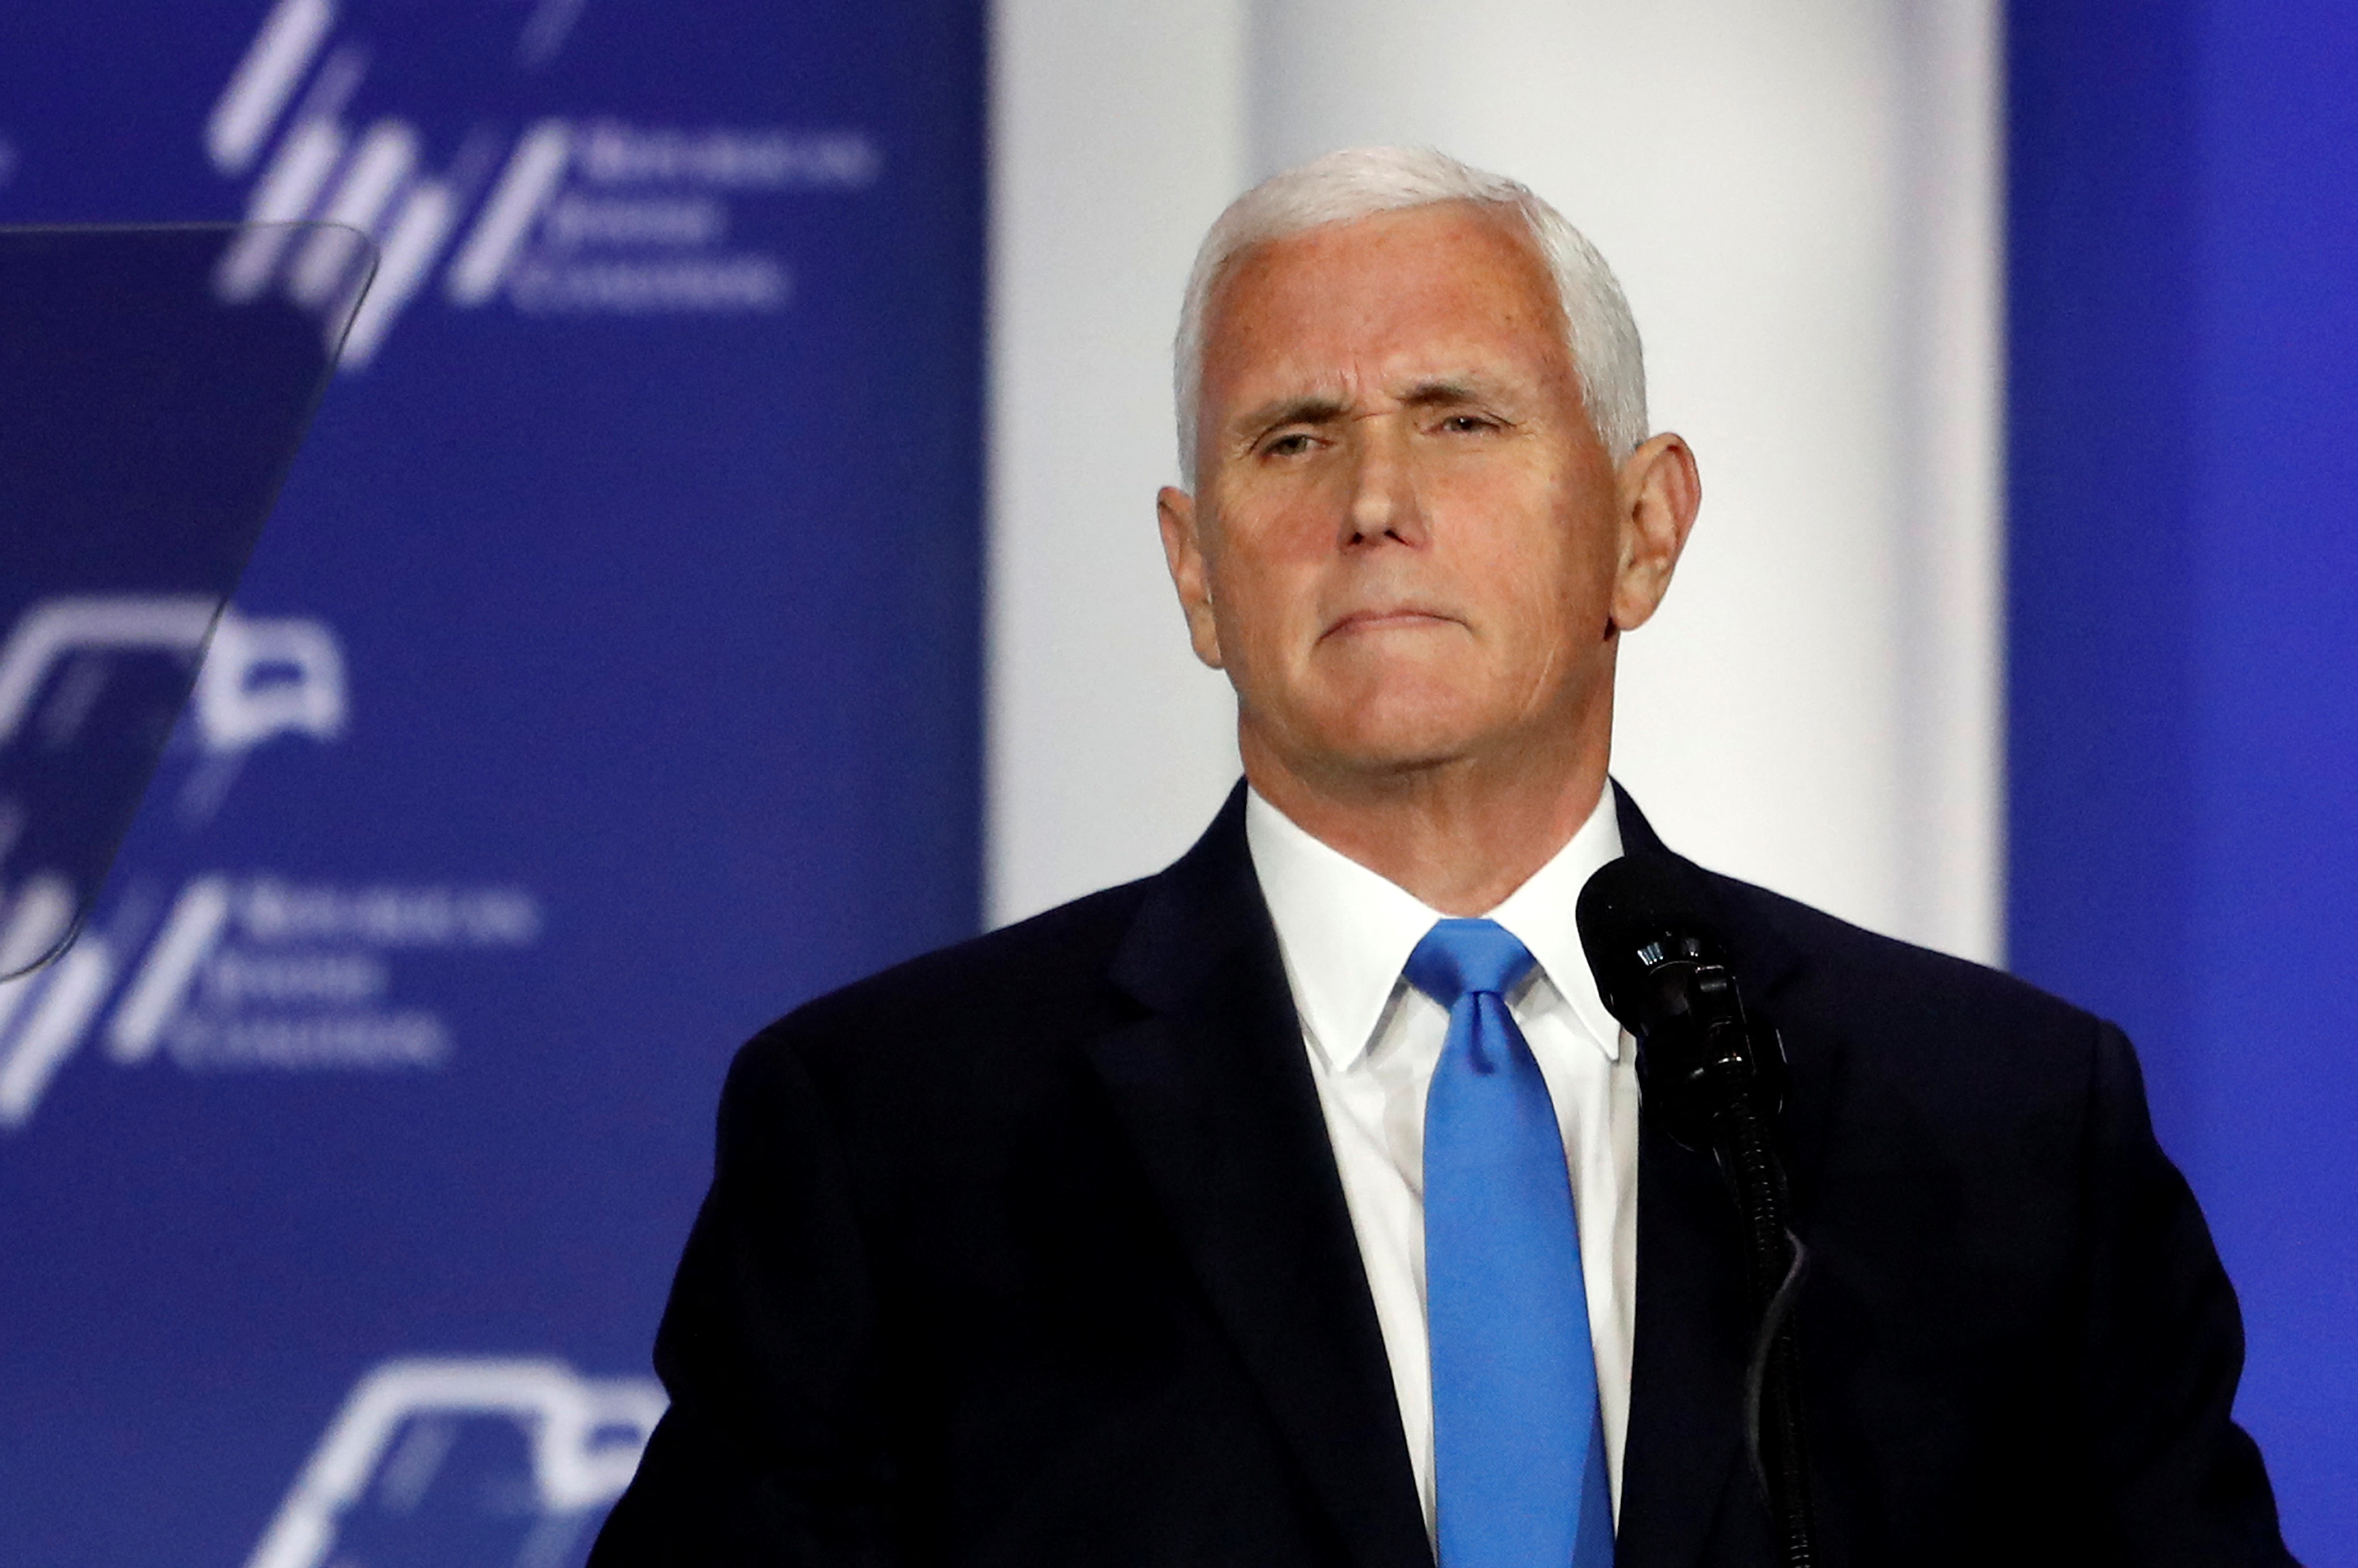 Former Vice President Mike Pence stands at the podium after suspending his presidential campaign in Las Vegas on October 28.